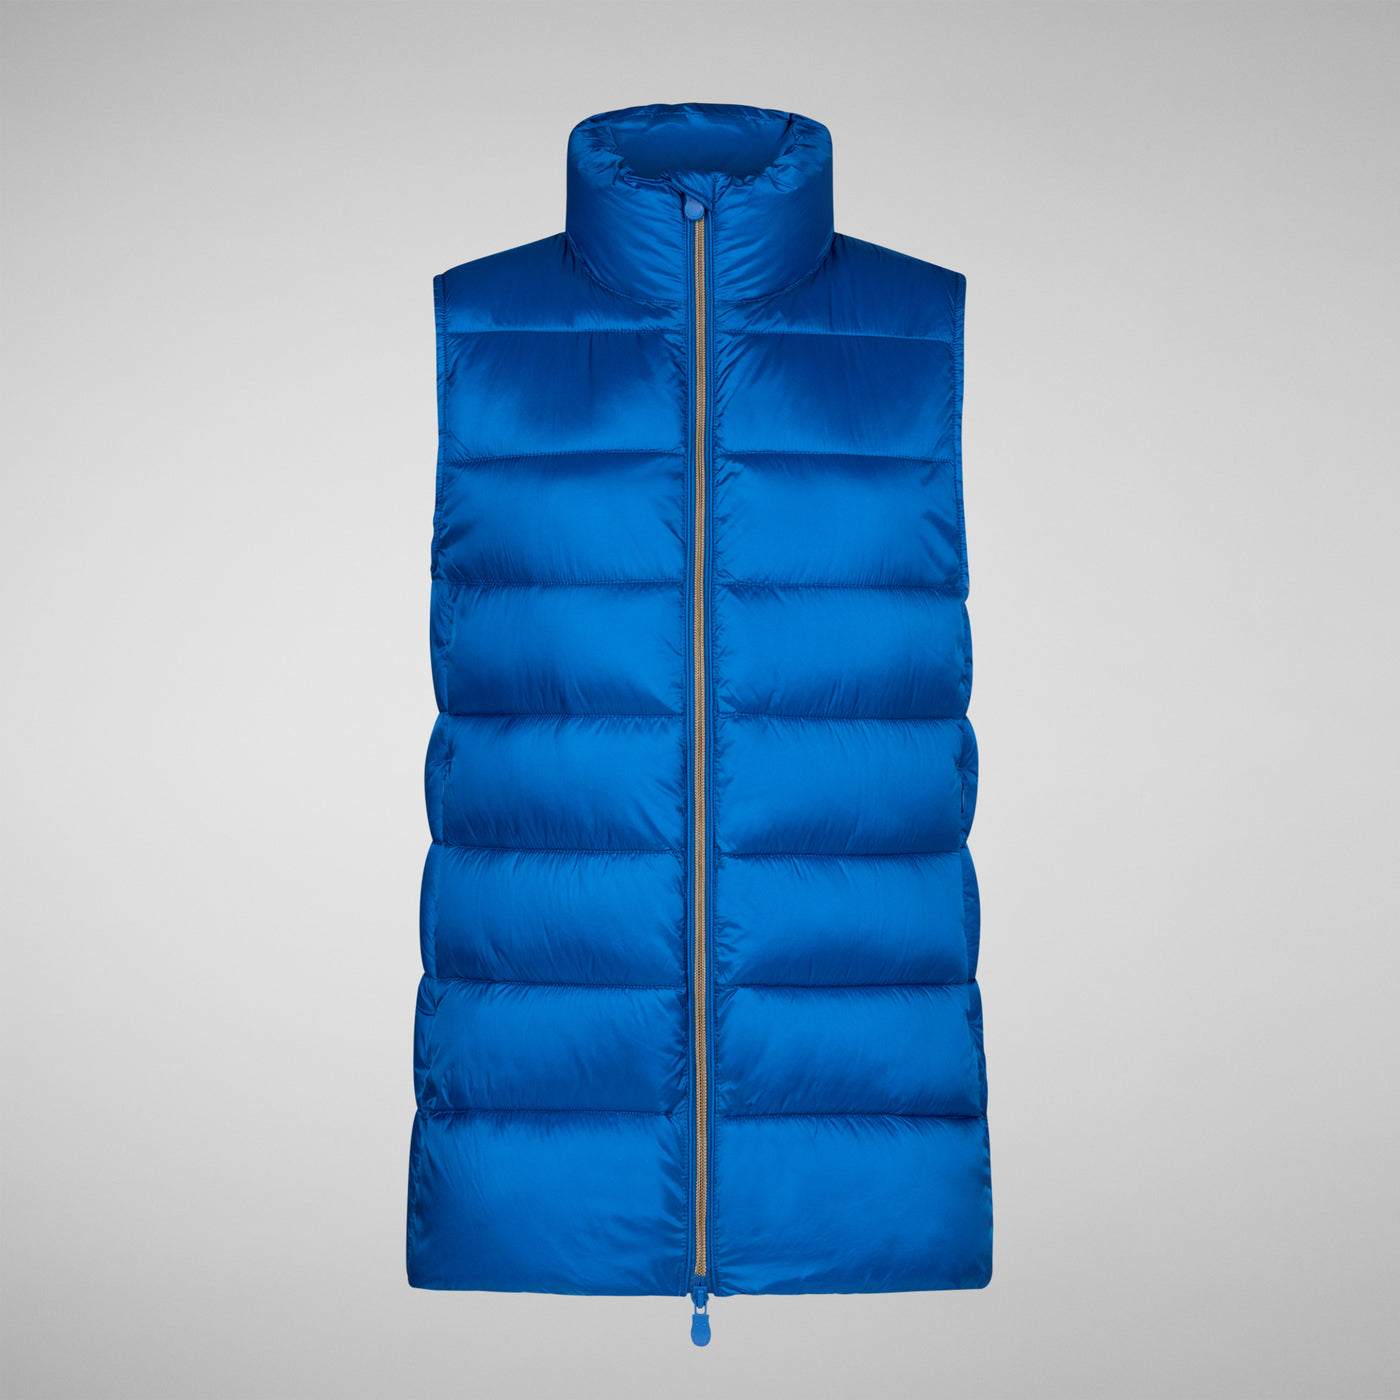 Women's Coral Puffer Vest in Blue Berry